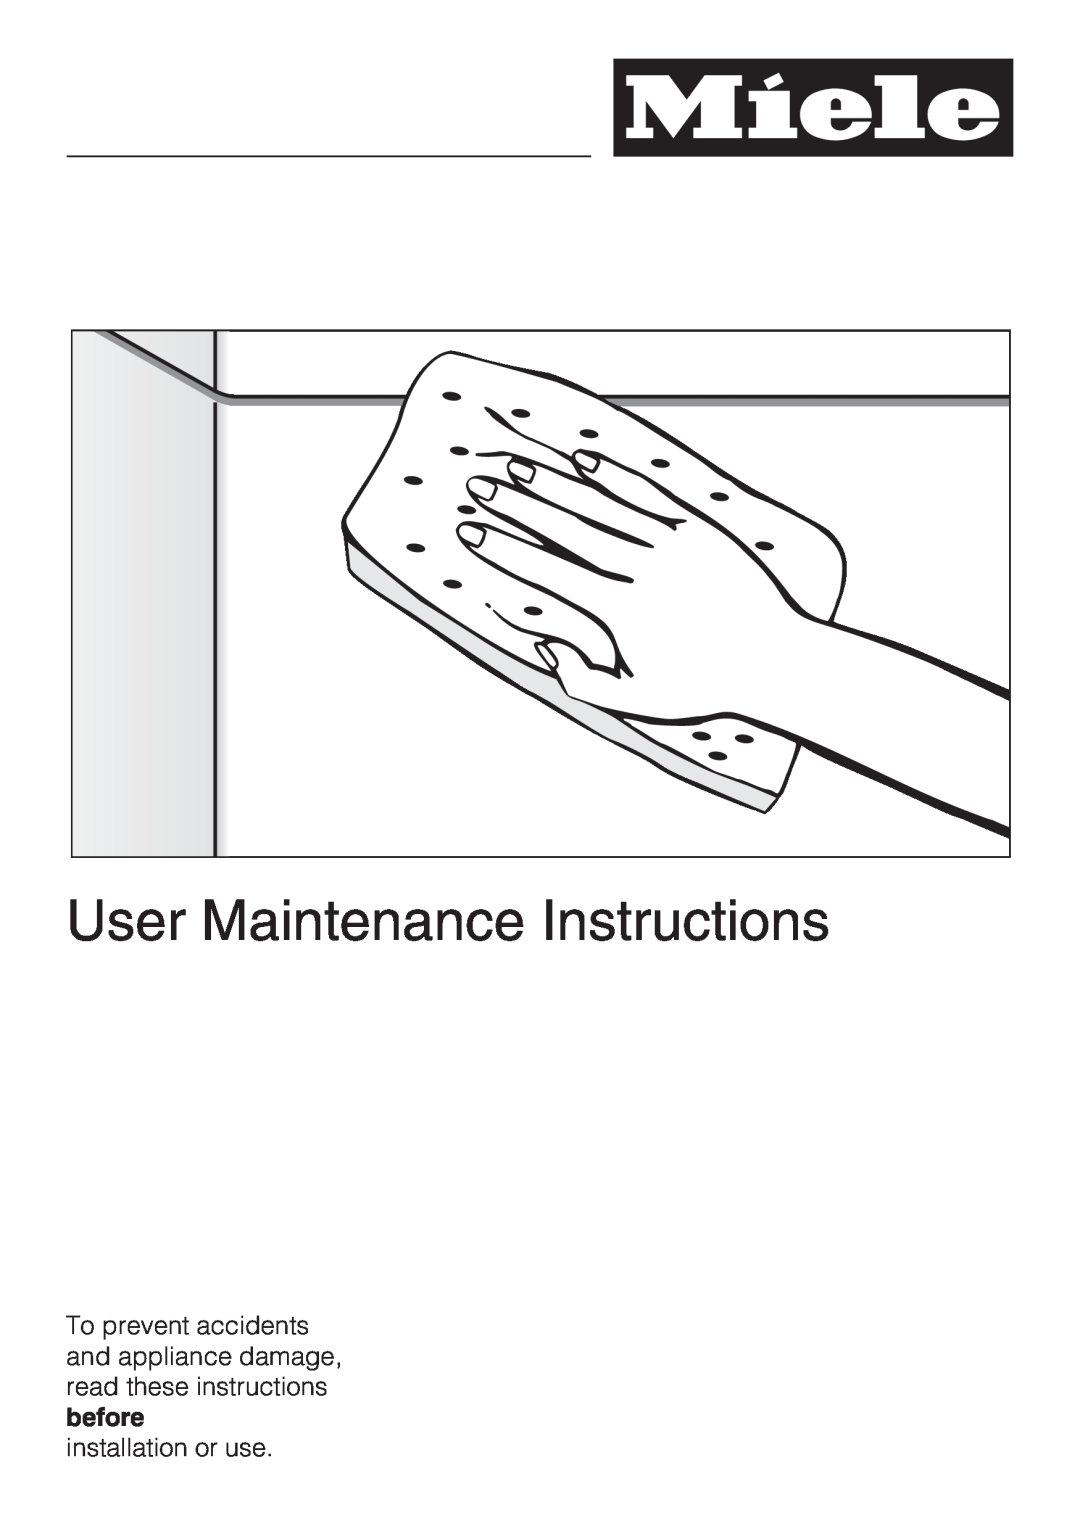 Miele G 5170, G 5175 manual User Maintenance Instructions, installation or use 